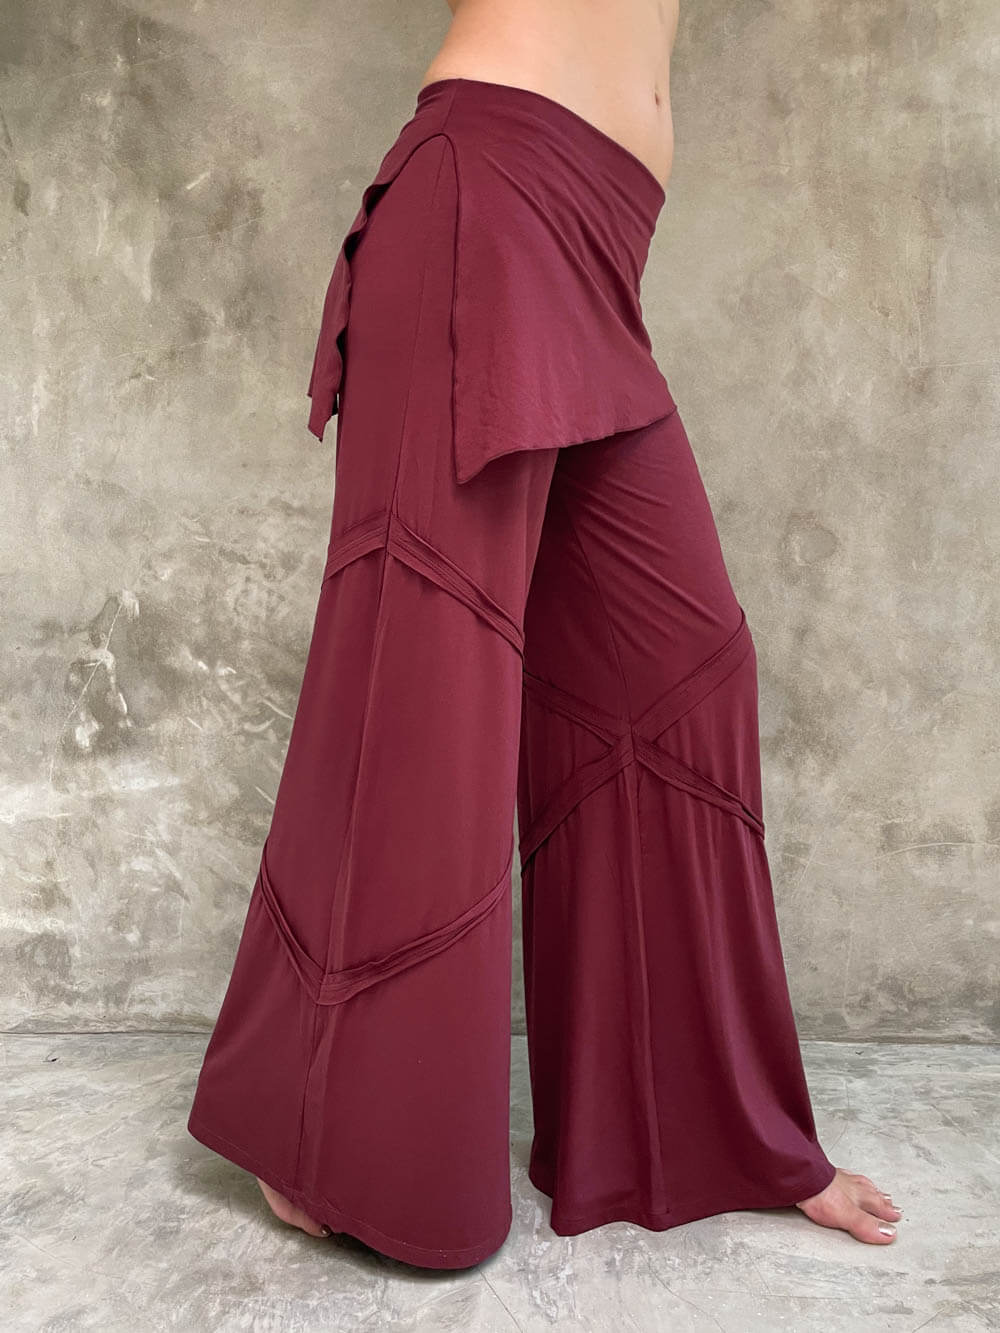 women's natural rayon jersey skirt-over maroon wide leg pants with raised diagonal stitching #color_wine